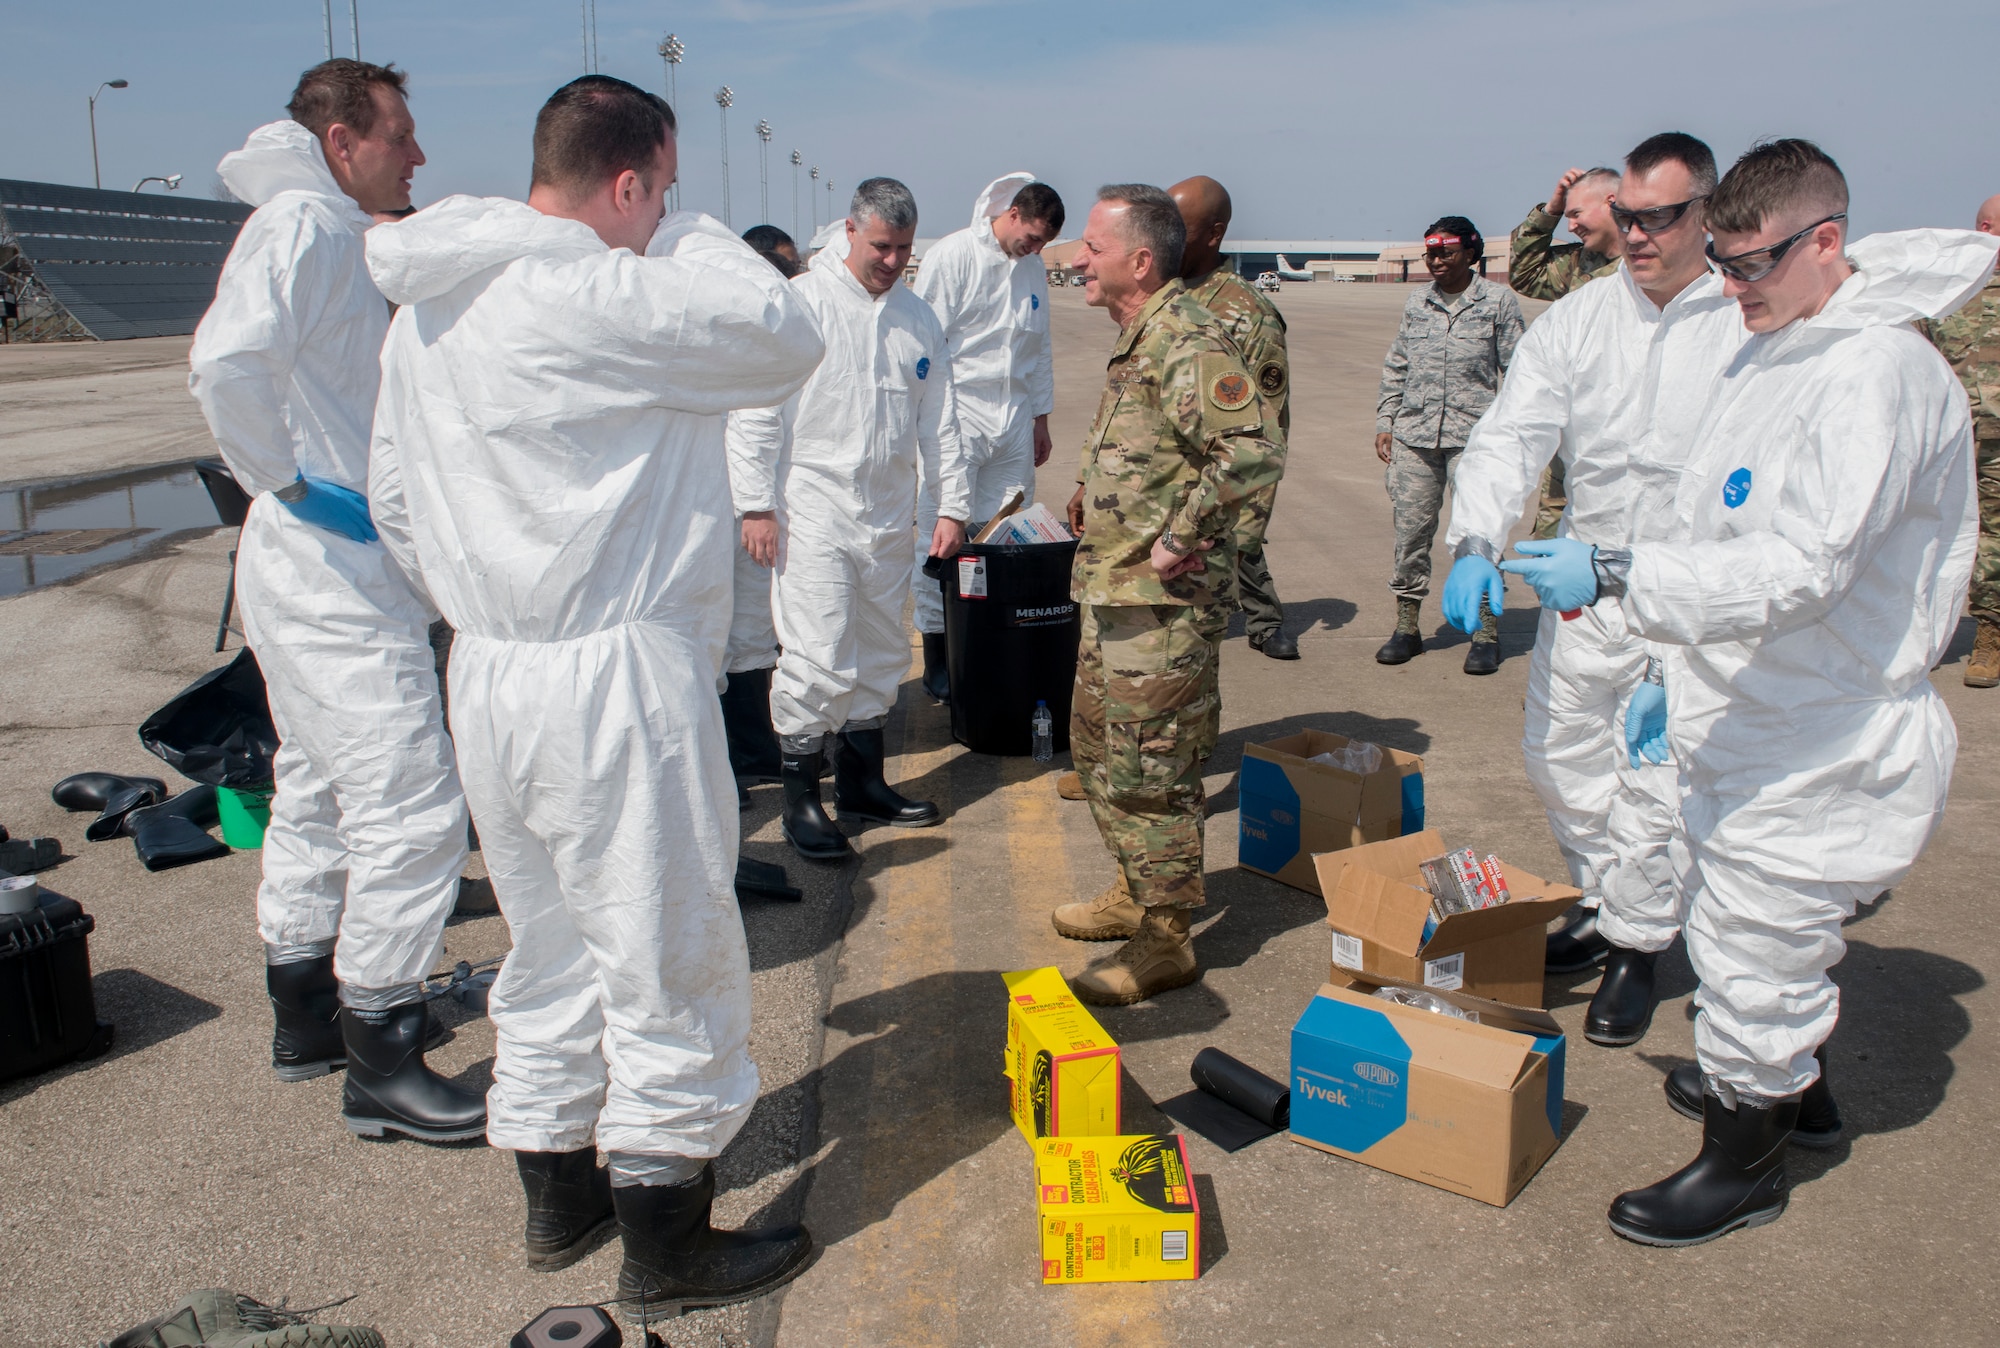 Air Force Chief of Staff Gen. David L. Goldfein talks with Airmen during his visit to Offutt Air Force Base, Nebraska, March 27, 2019. Goldfein and Chief Master Sgt. of the Air Force Kaleth O. Wright stopped by the installation to survey damage caused by recent flooding. (U.S. Air Force photo by Delanie Stafford)